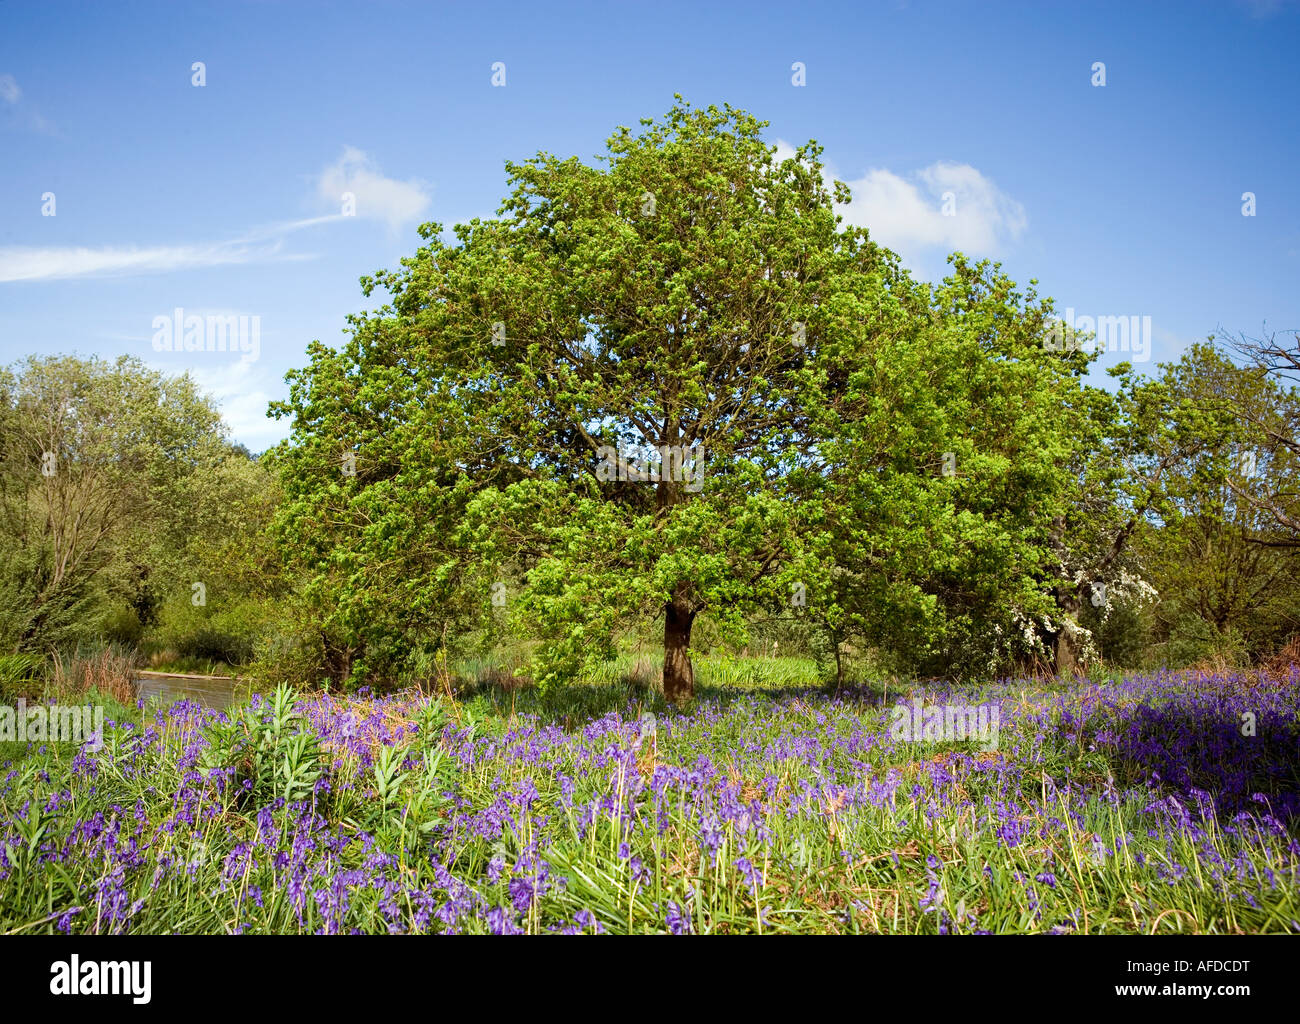 Tree shot in spring surrounded by flowering bluebells Stock Photo